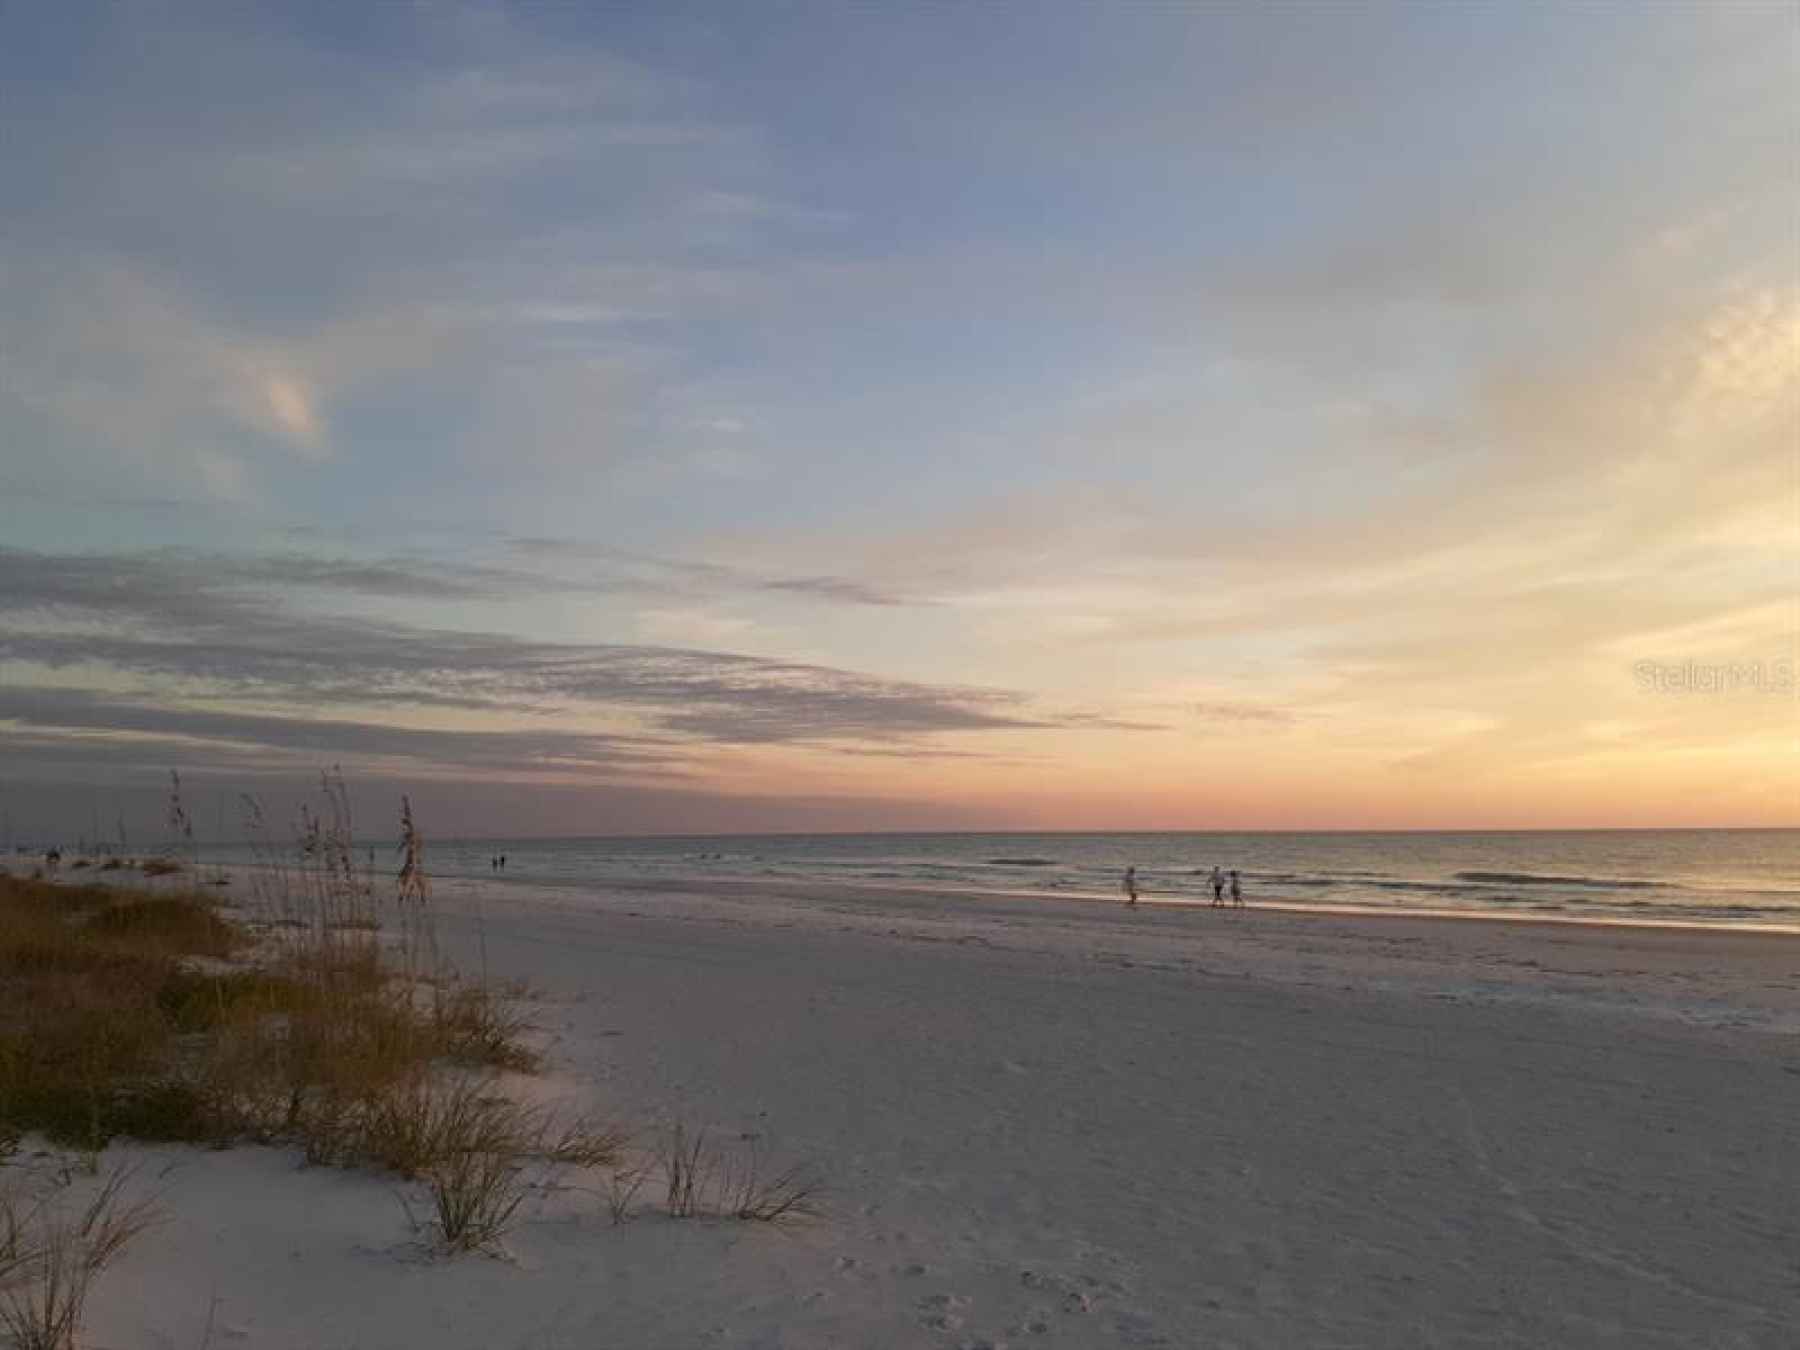 Pinellas County has many public beach accesses - easy to go walk the soft, sandy BEACHES